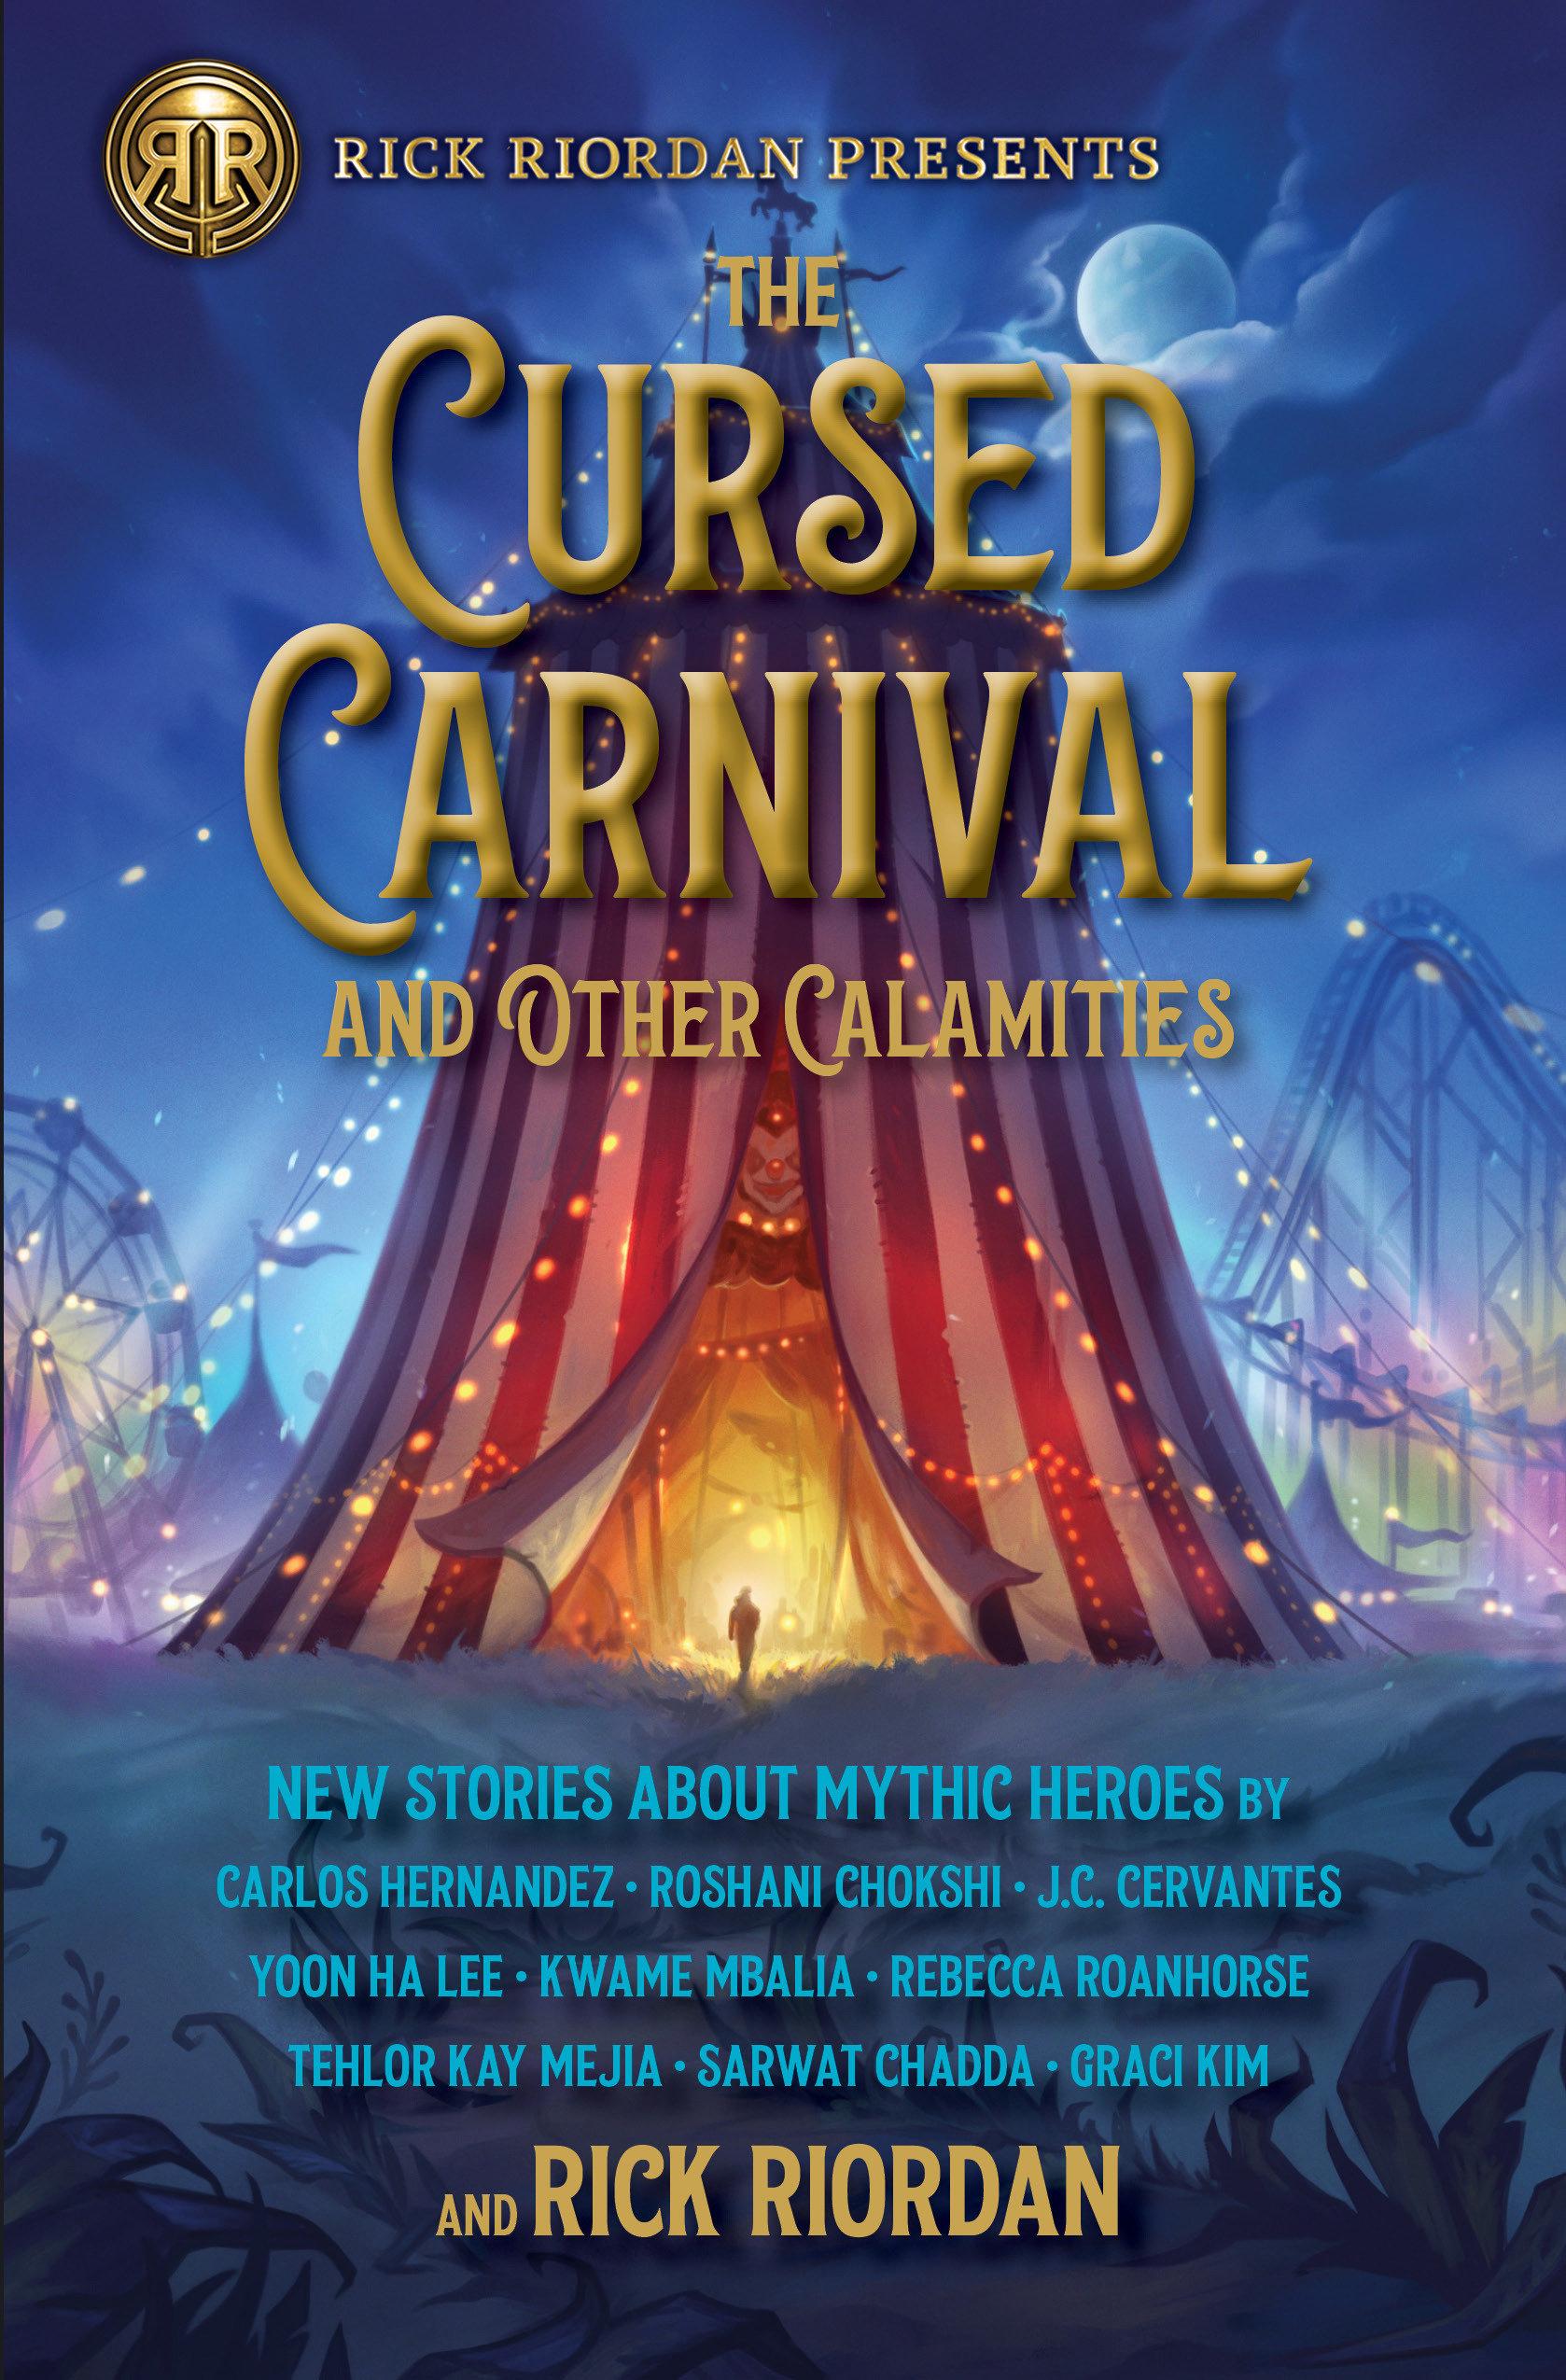 The Rick Riordan Presents: Cursed Carnival and Other Calamities